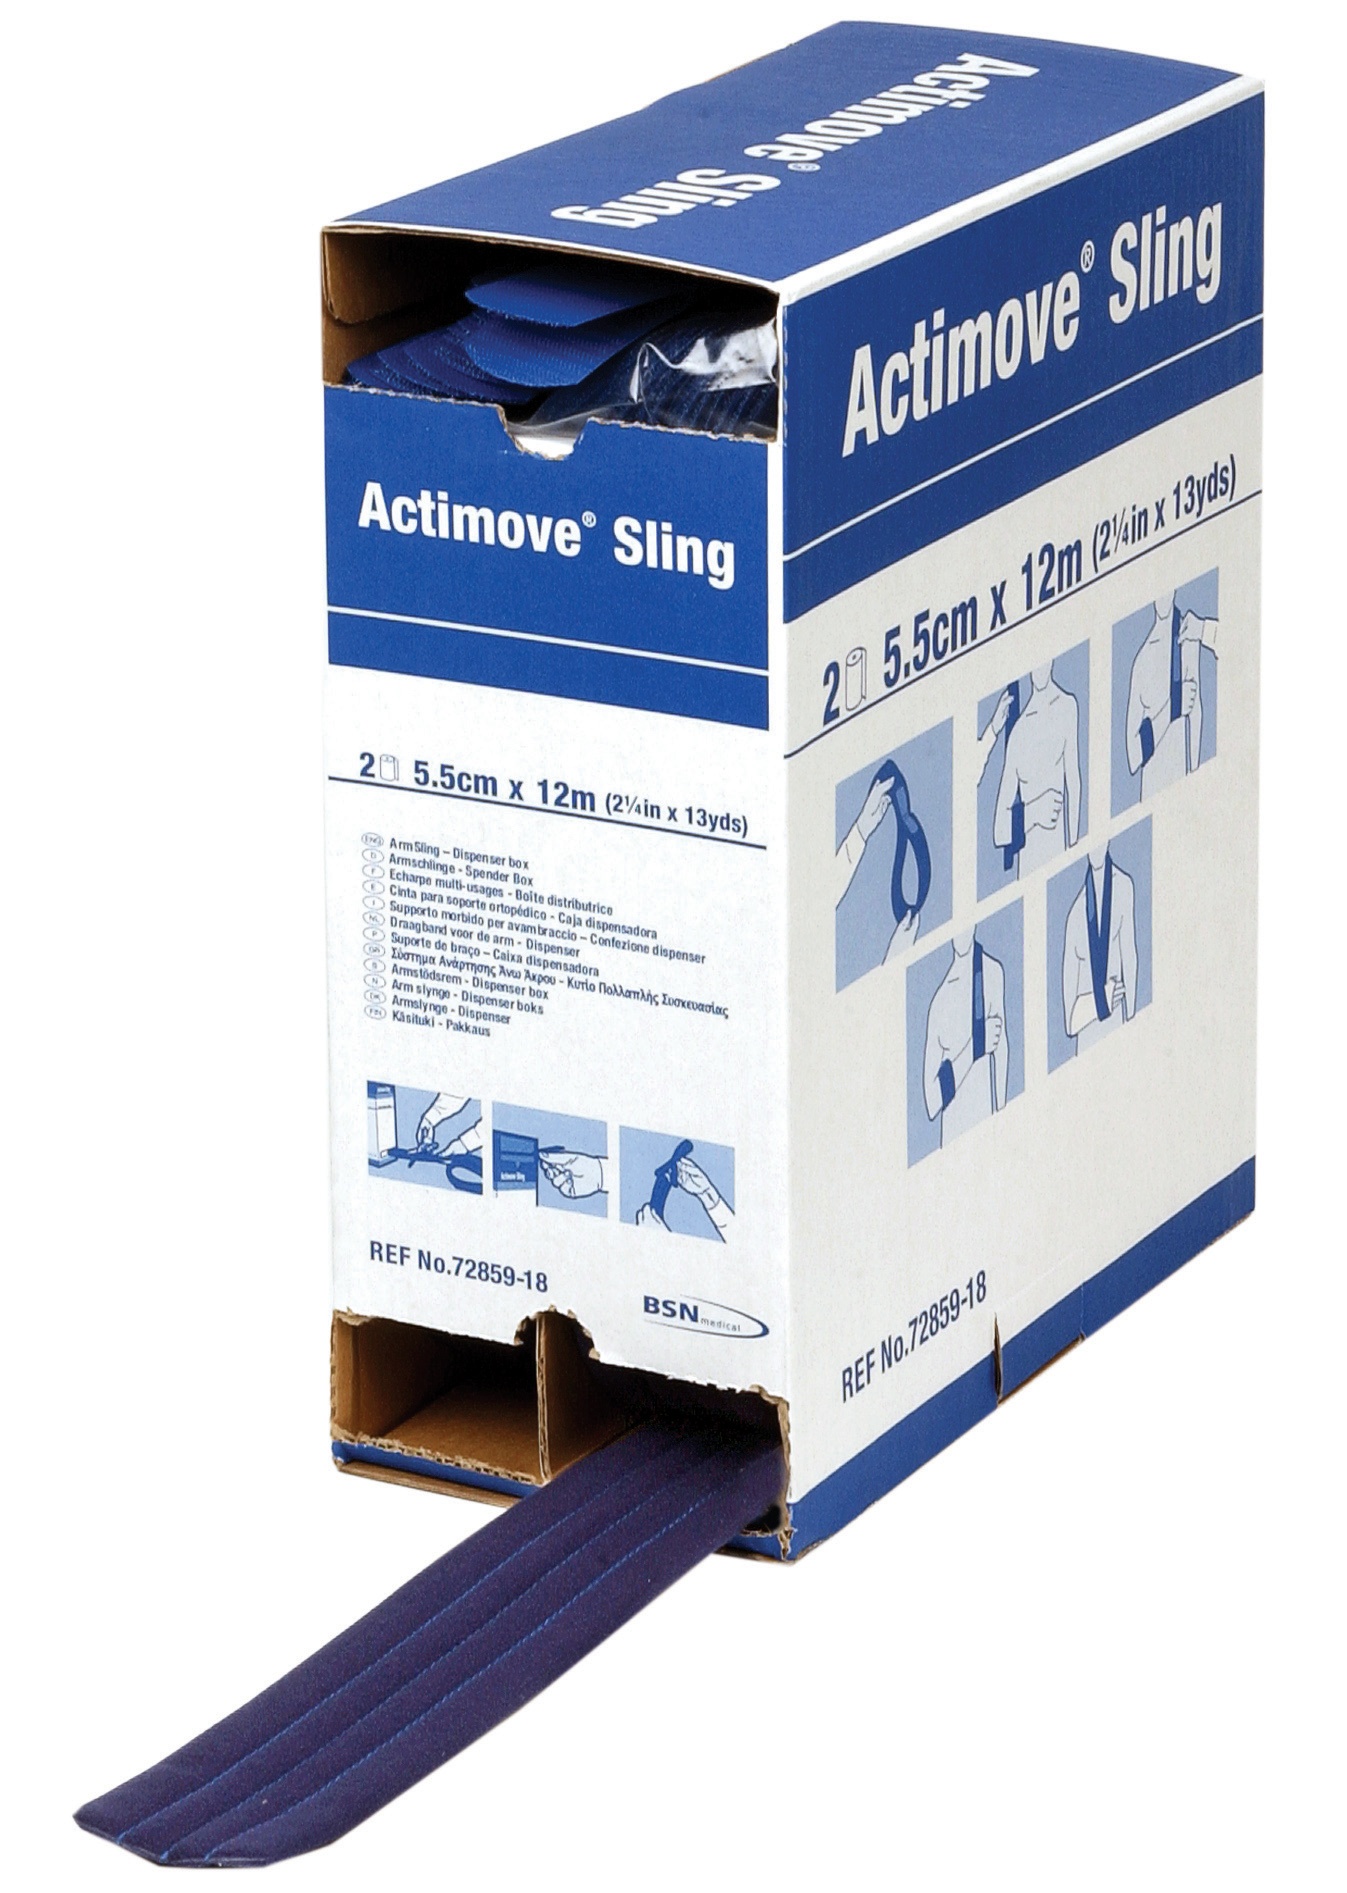 Actimove Sling Collar and Cuff Support 12m roll Bx2 image 0